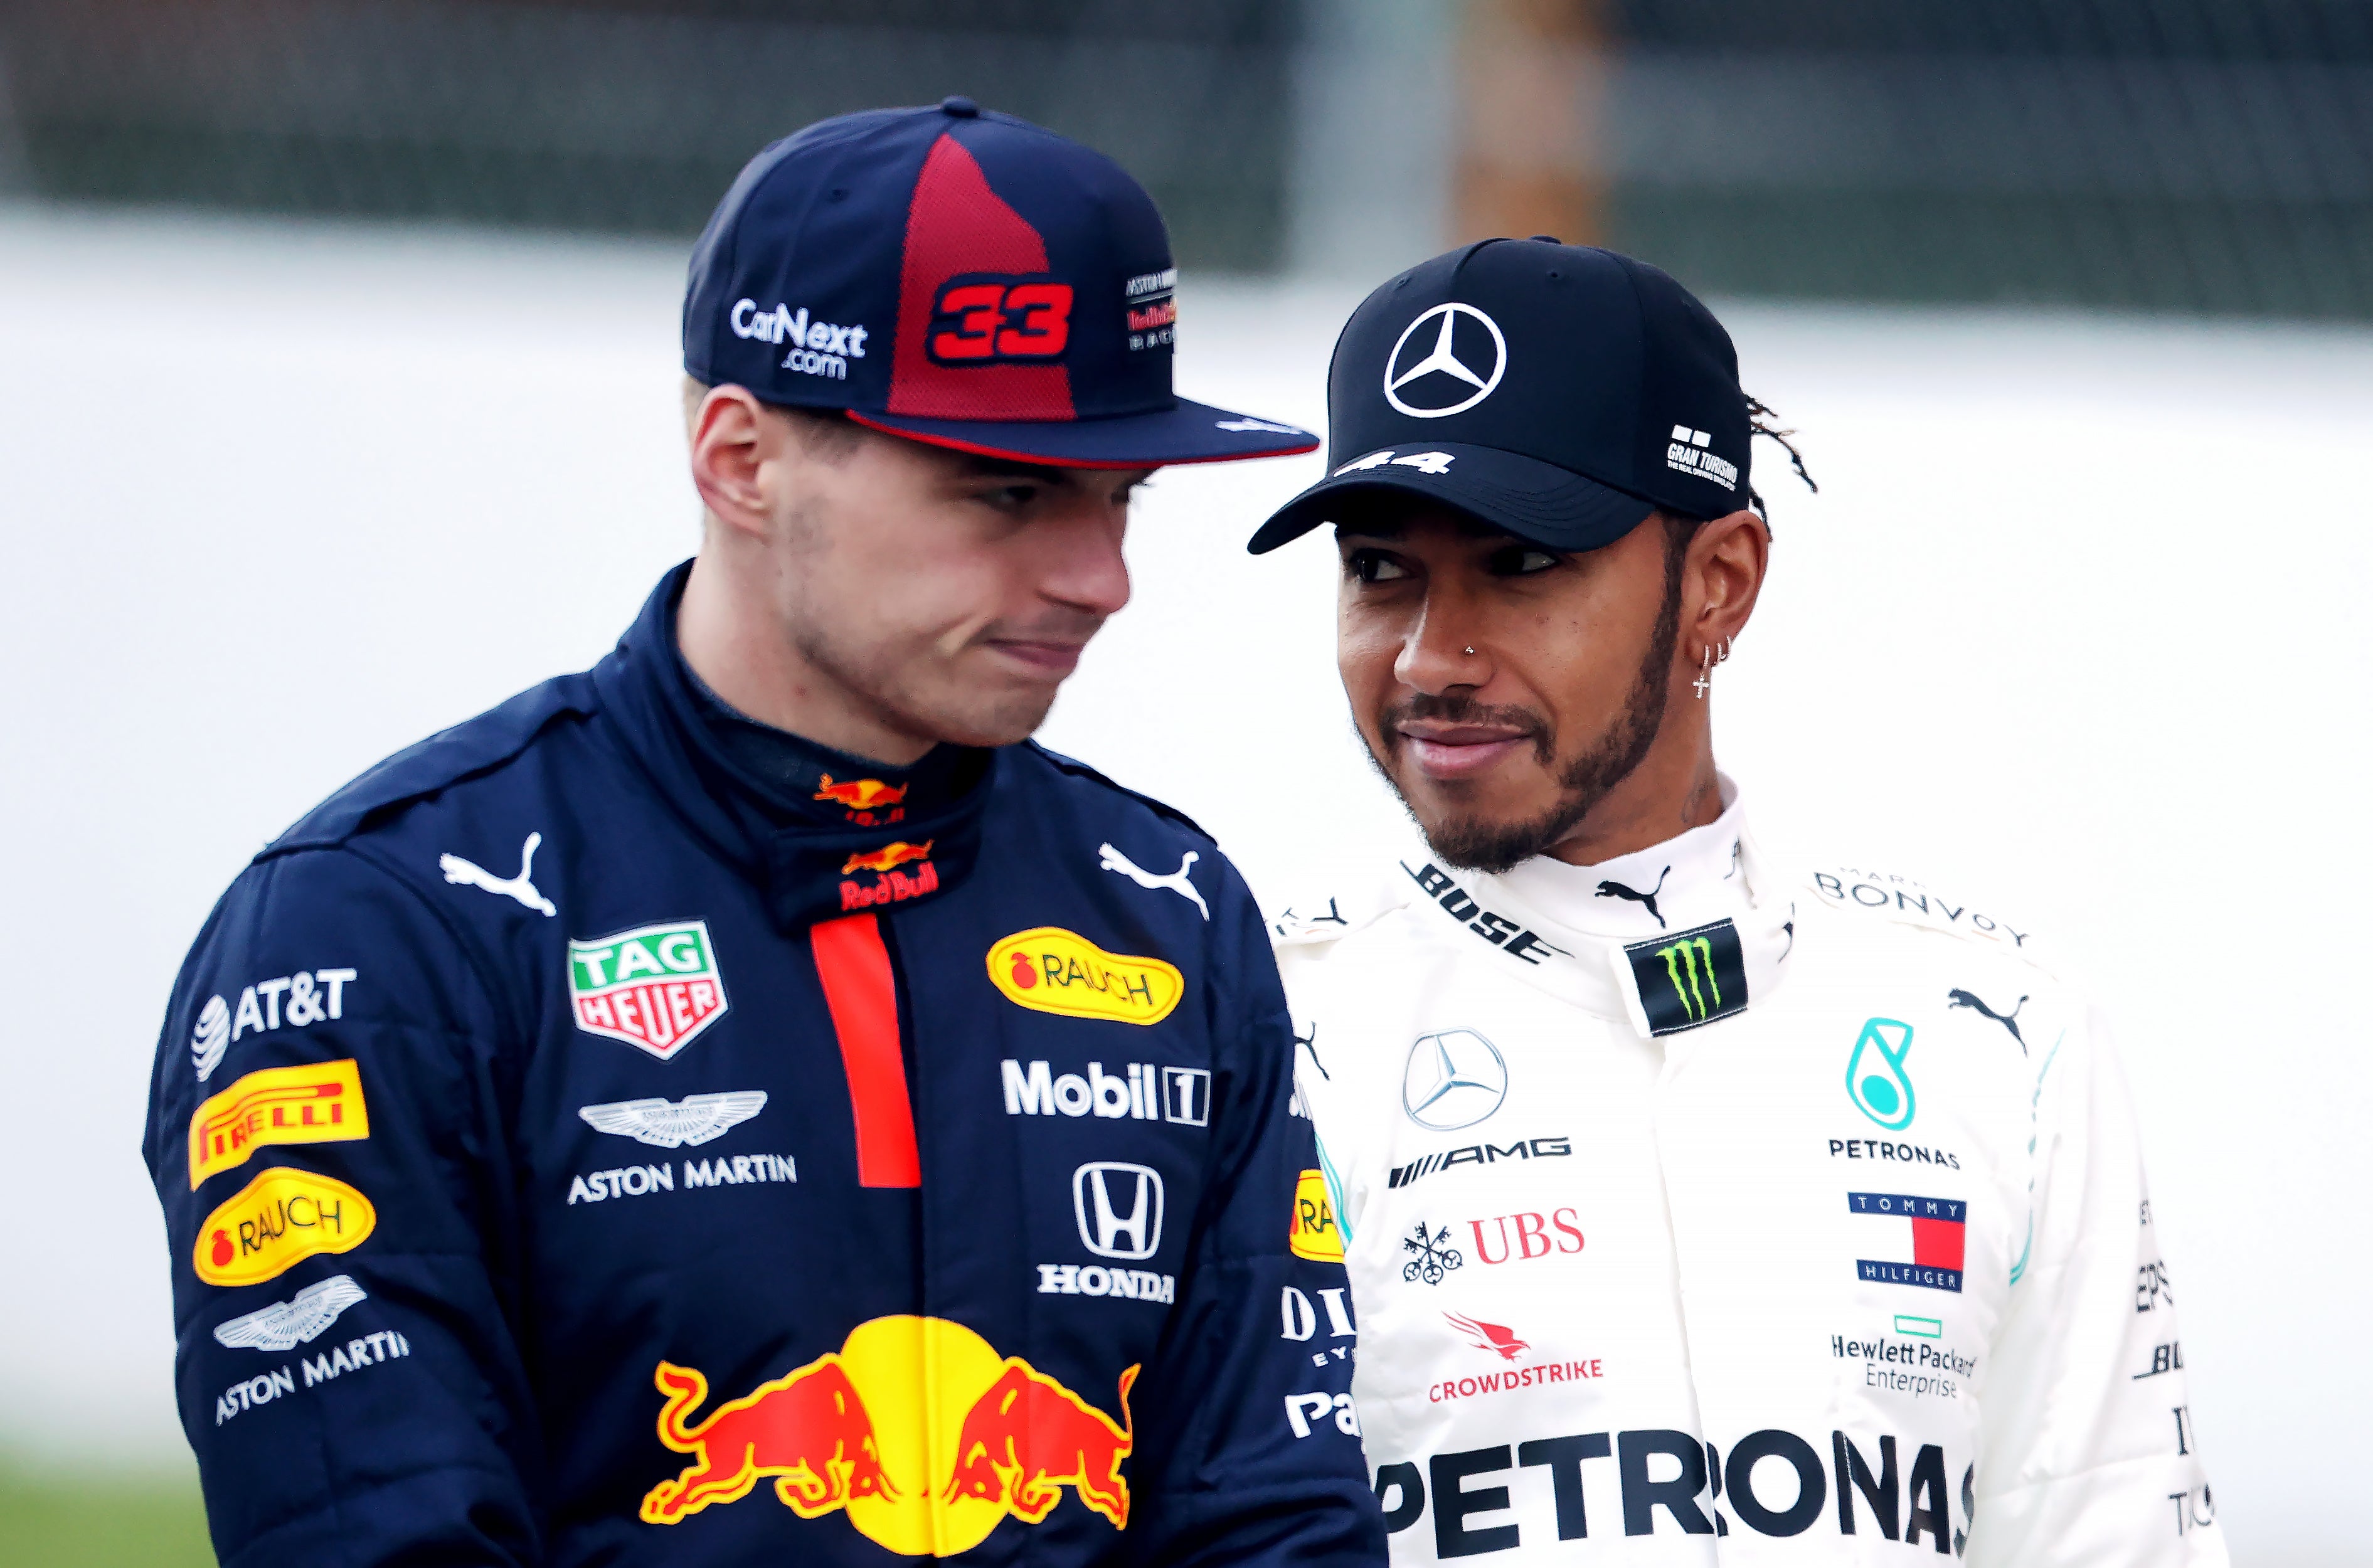 Lewis Hamilton must end his losing streak to stop Max Verstappen from executing a championship rout